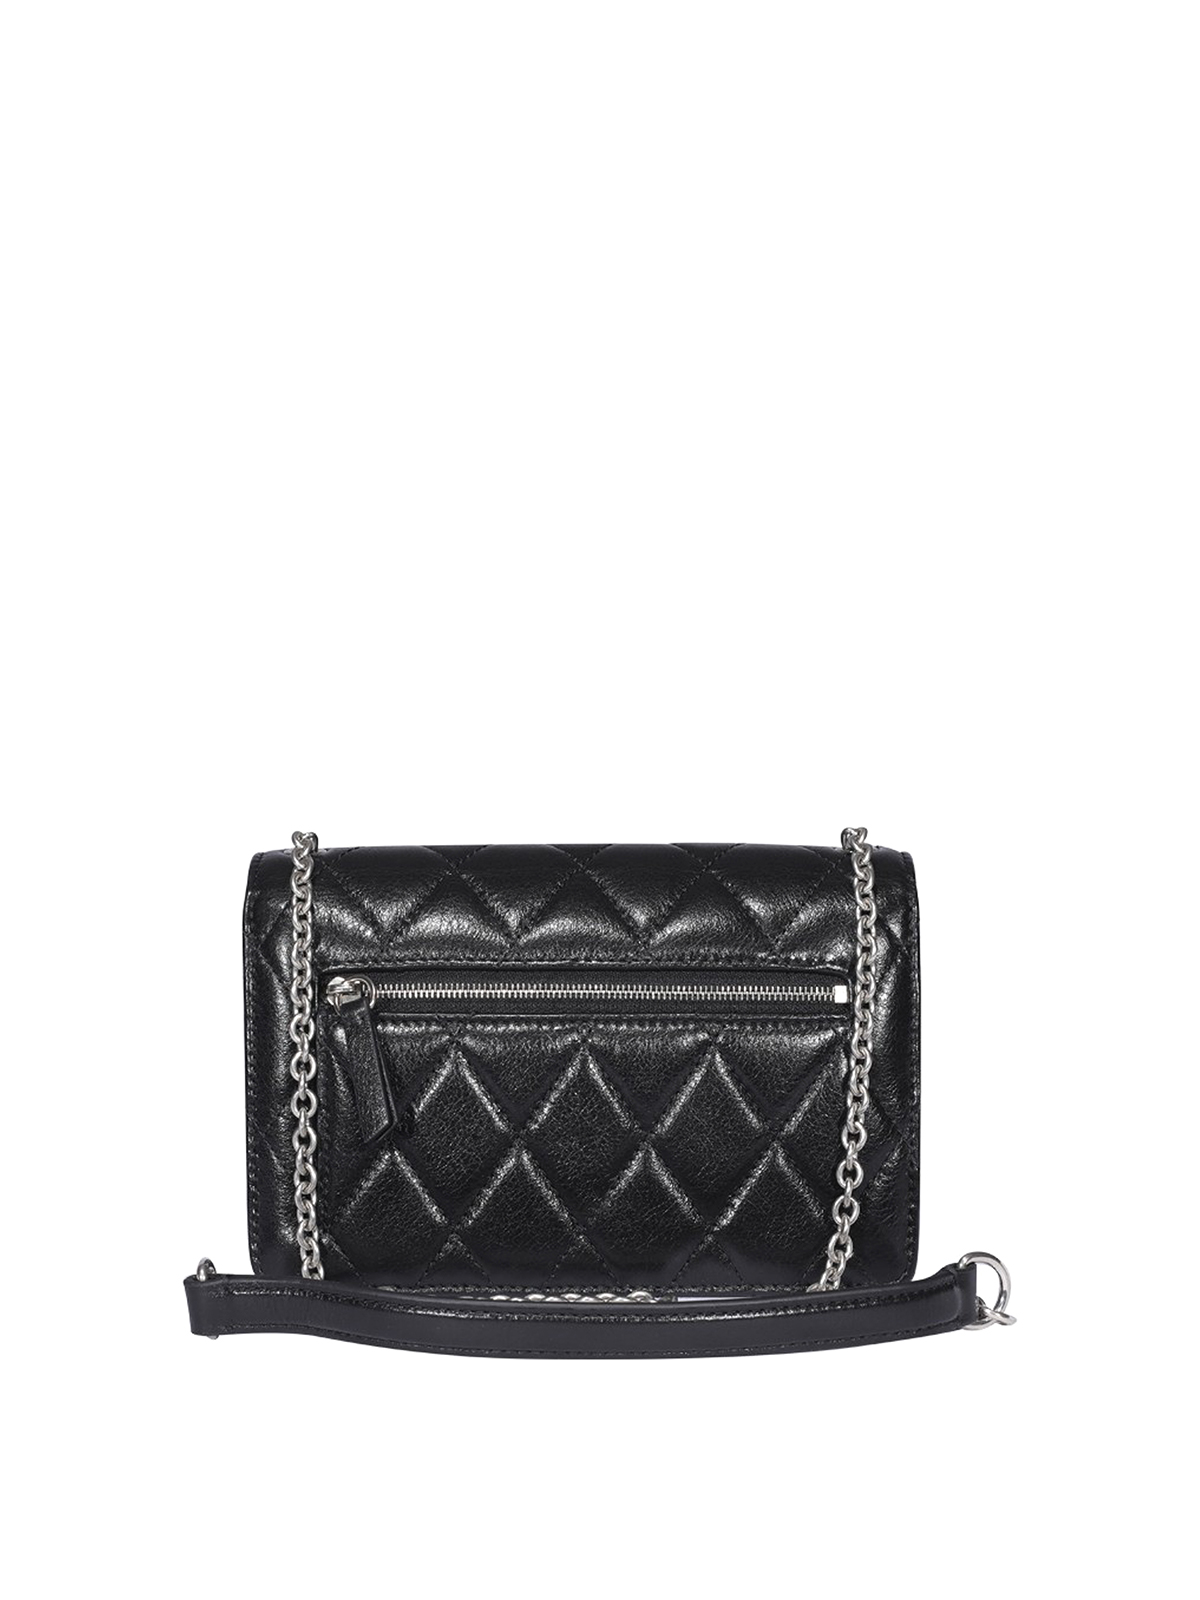 Shop Mulberry Darley Small Cross Body Bag In Negro